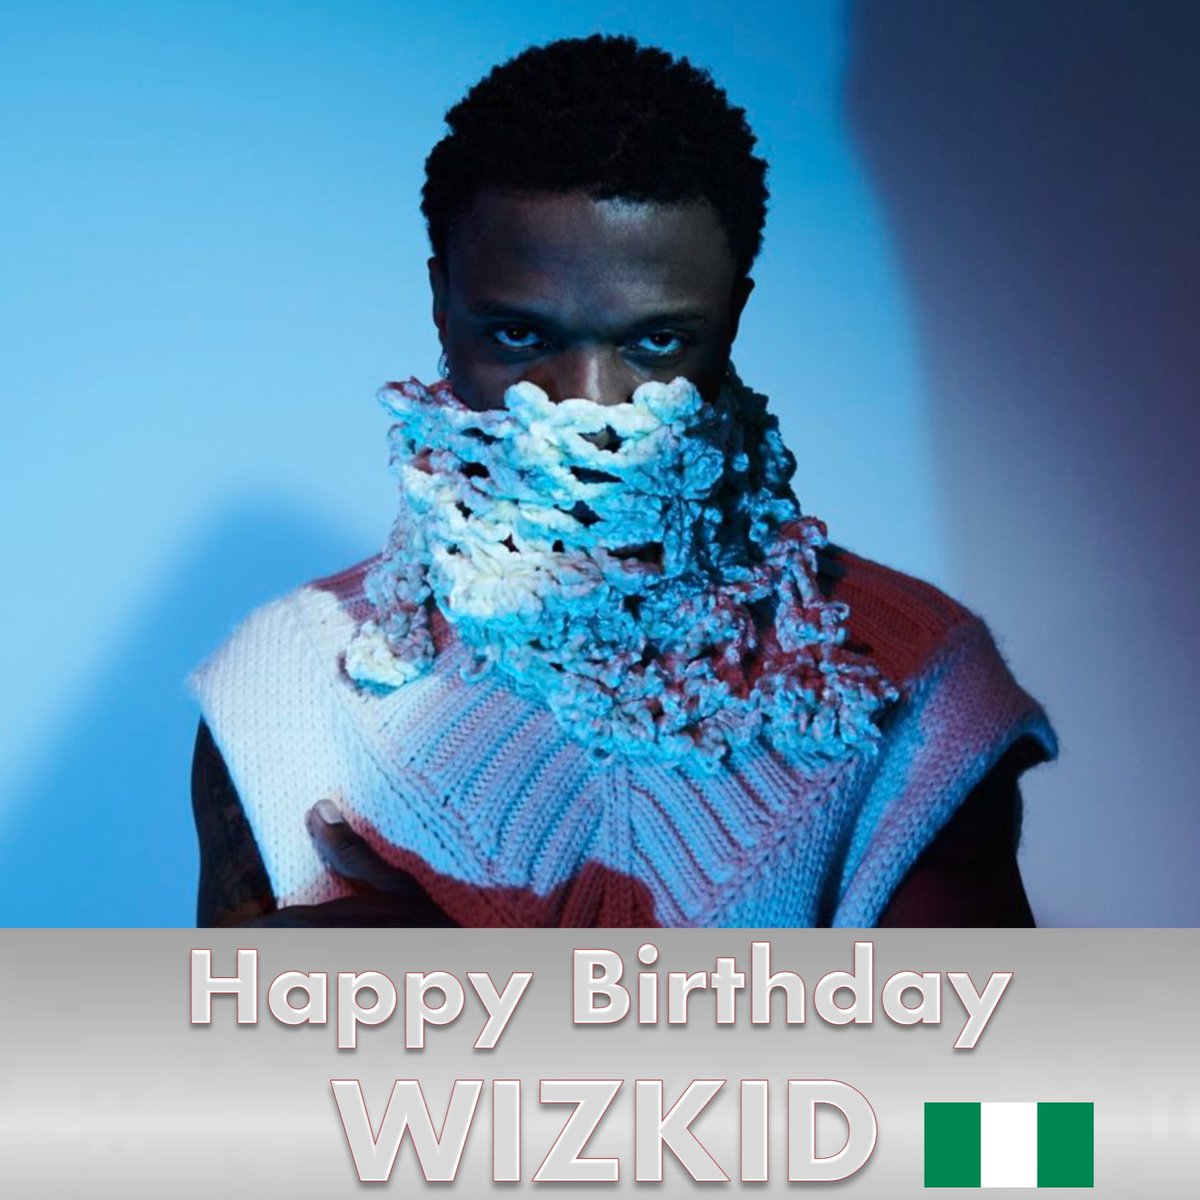 Happy 33rd Birthday to the gorgeous, super talented singer, songwriter and Global Icon, #Wizkid, regarded as one of the biggest and most influential African artists of all time! Wizkid became worldfamous overnight with #OneDance, his hawt collab with #Drake which went straight to…